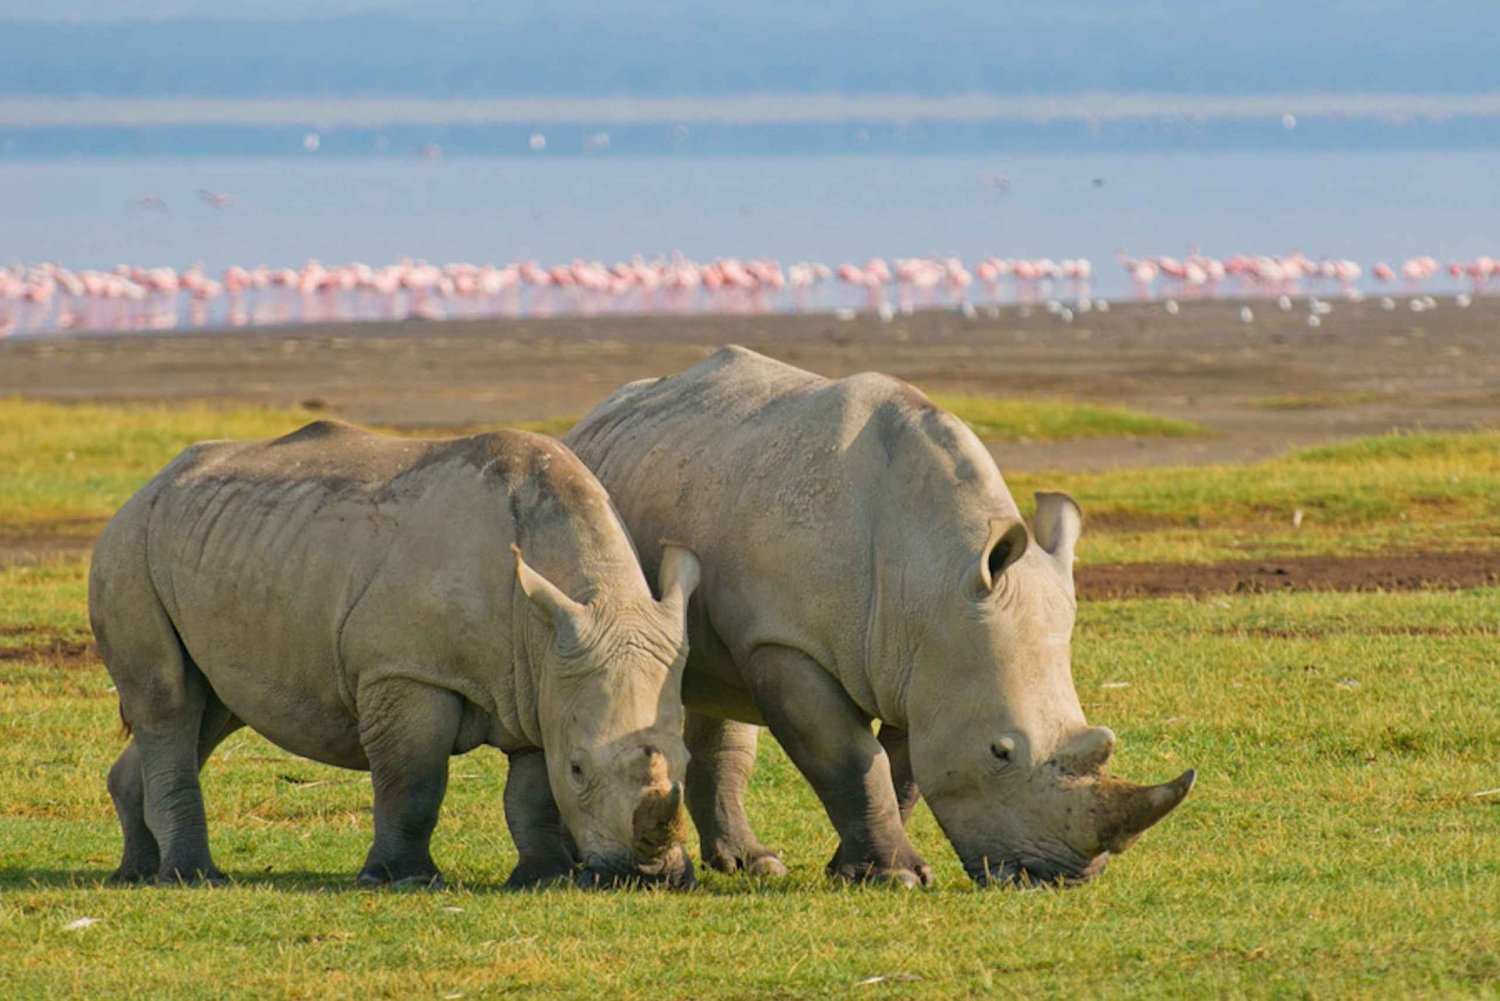 From Arusha: 7-Day Big 5 Safari with Accommodation